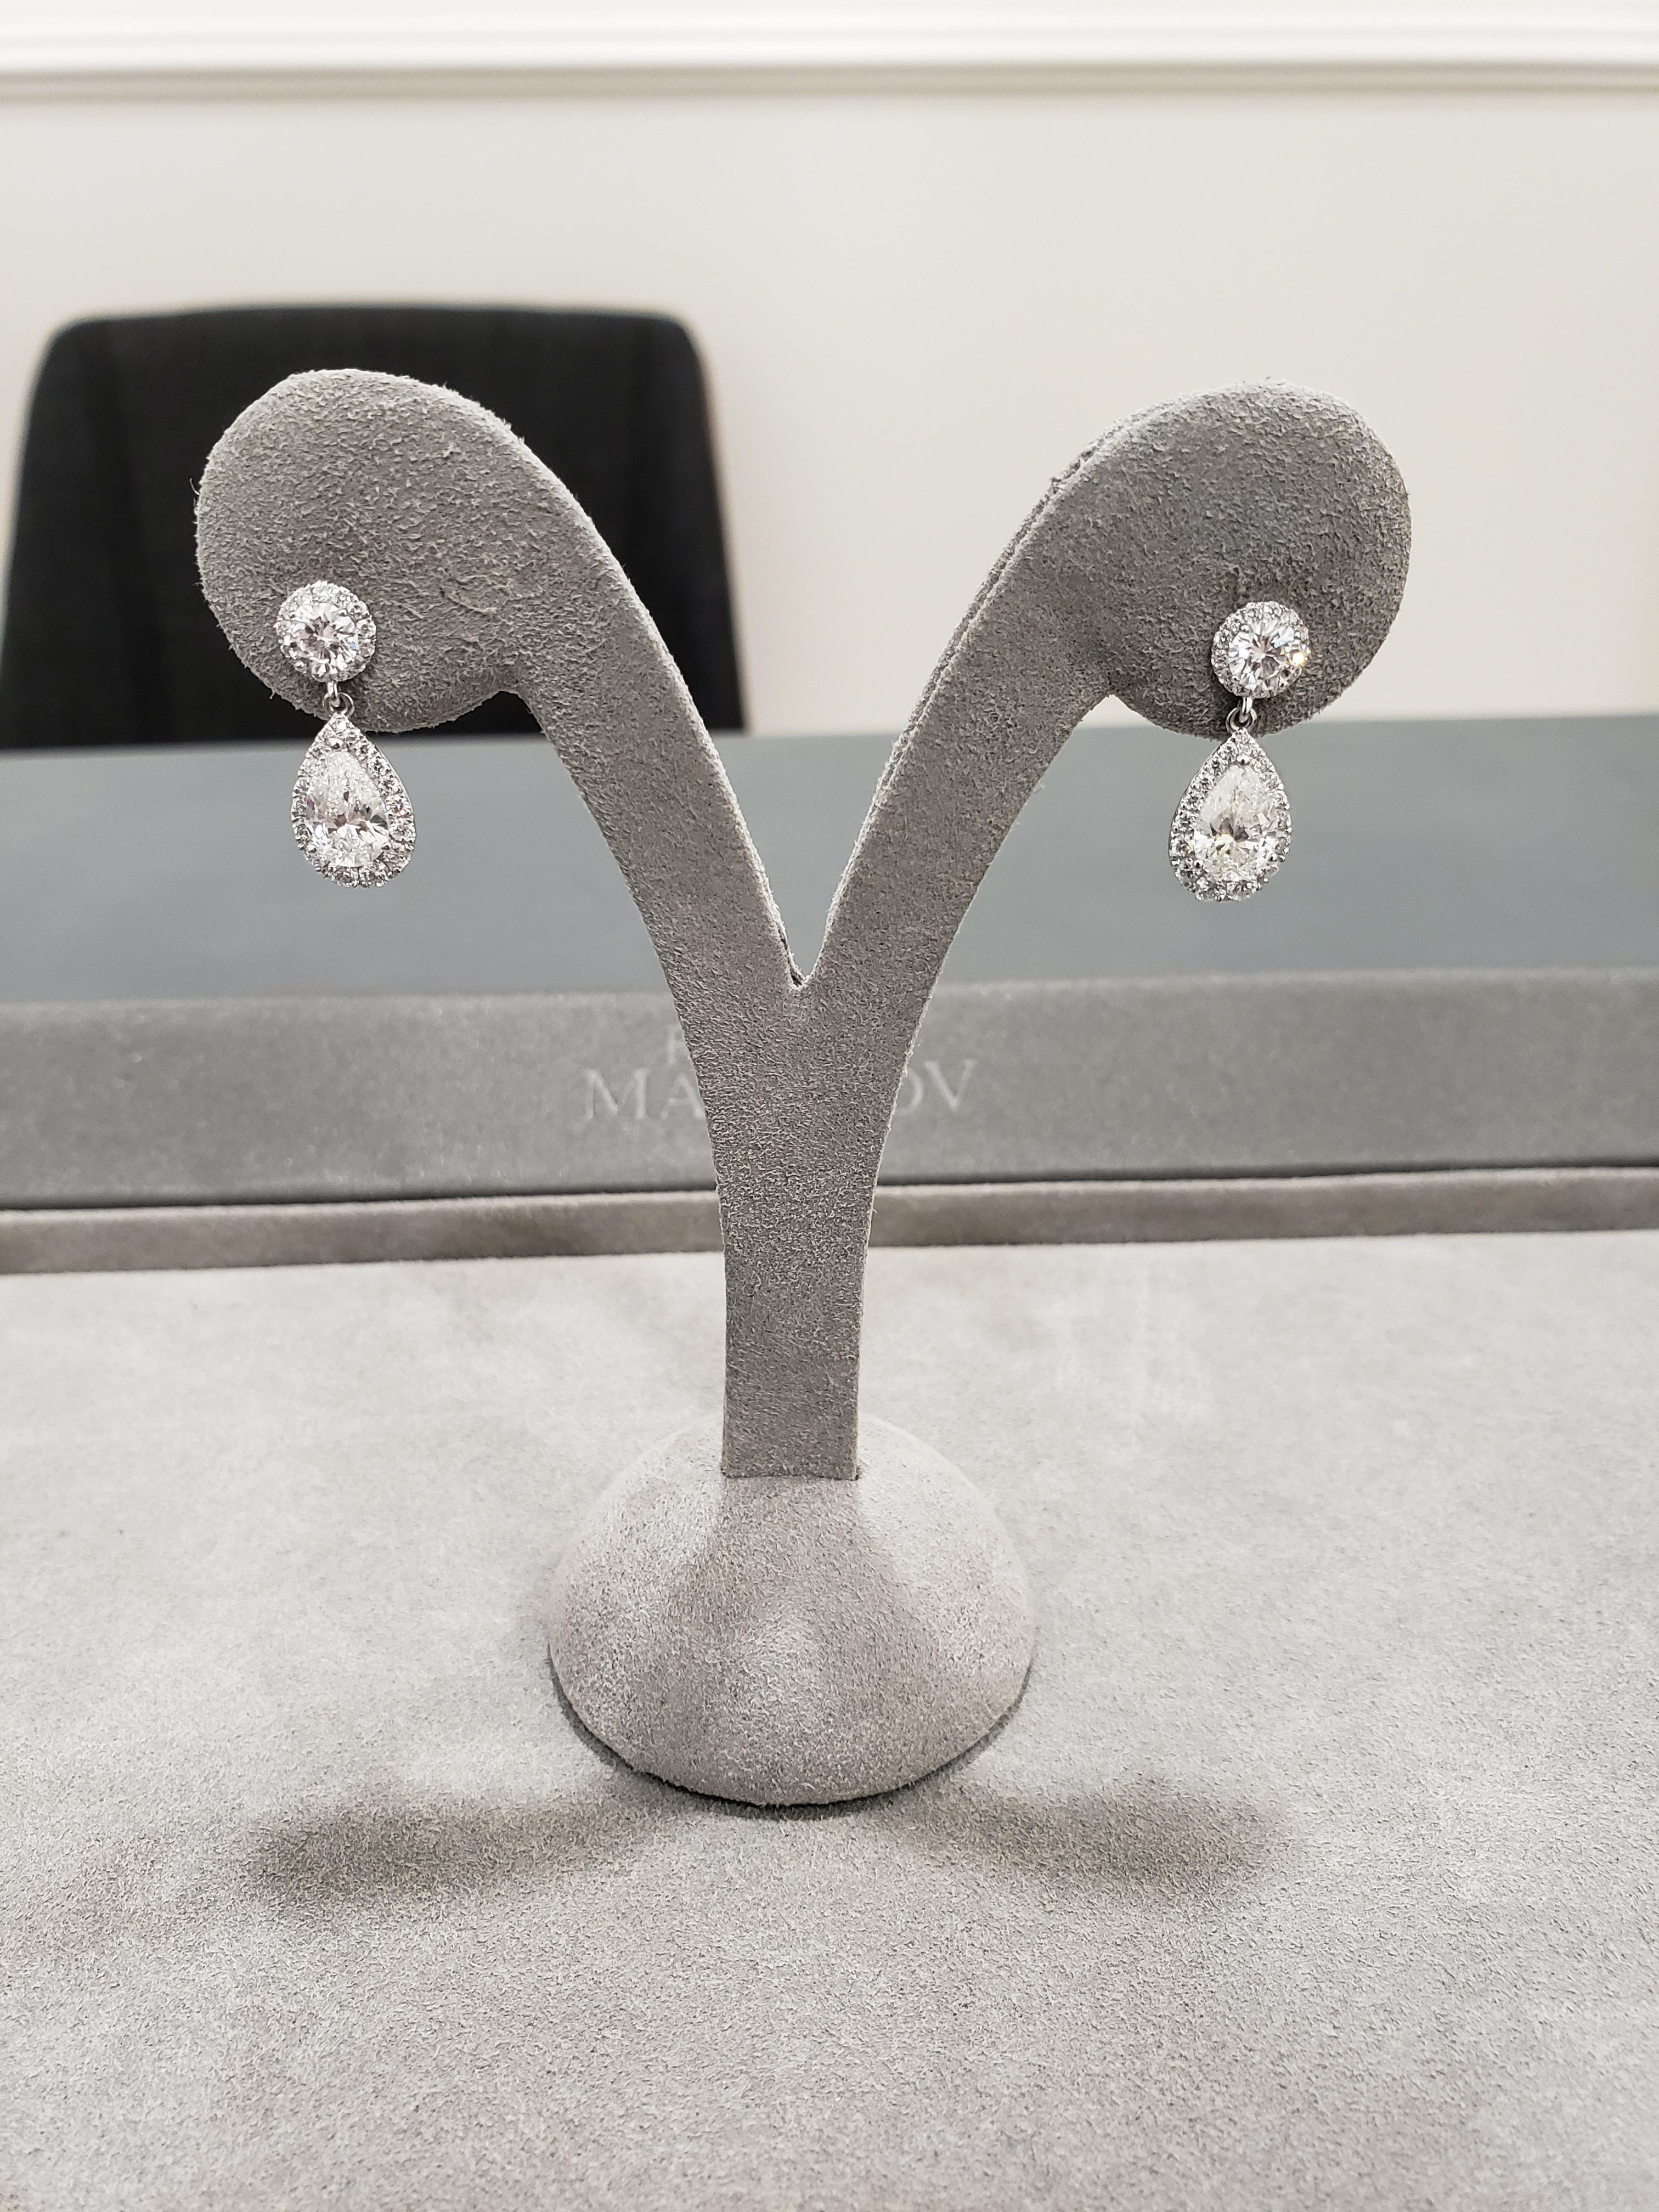 Showcasing pear shape diamond center stones weighing 1.79 carats total, surrounded by a halo of round brilliant diamonds. Suspended on a diamond encrusted post made in 18 karat white gold. Accent diamonds weigh 1.29 carats total.

